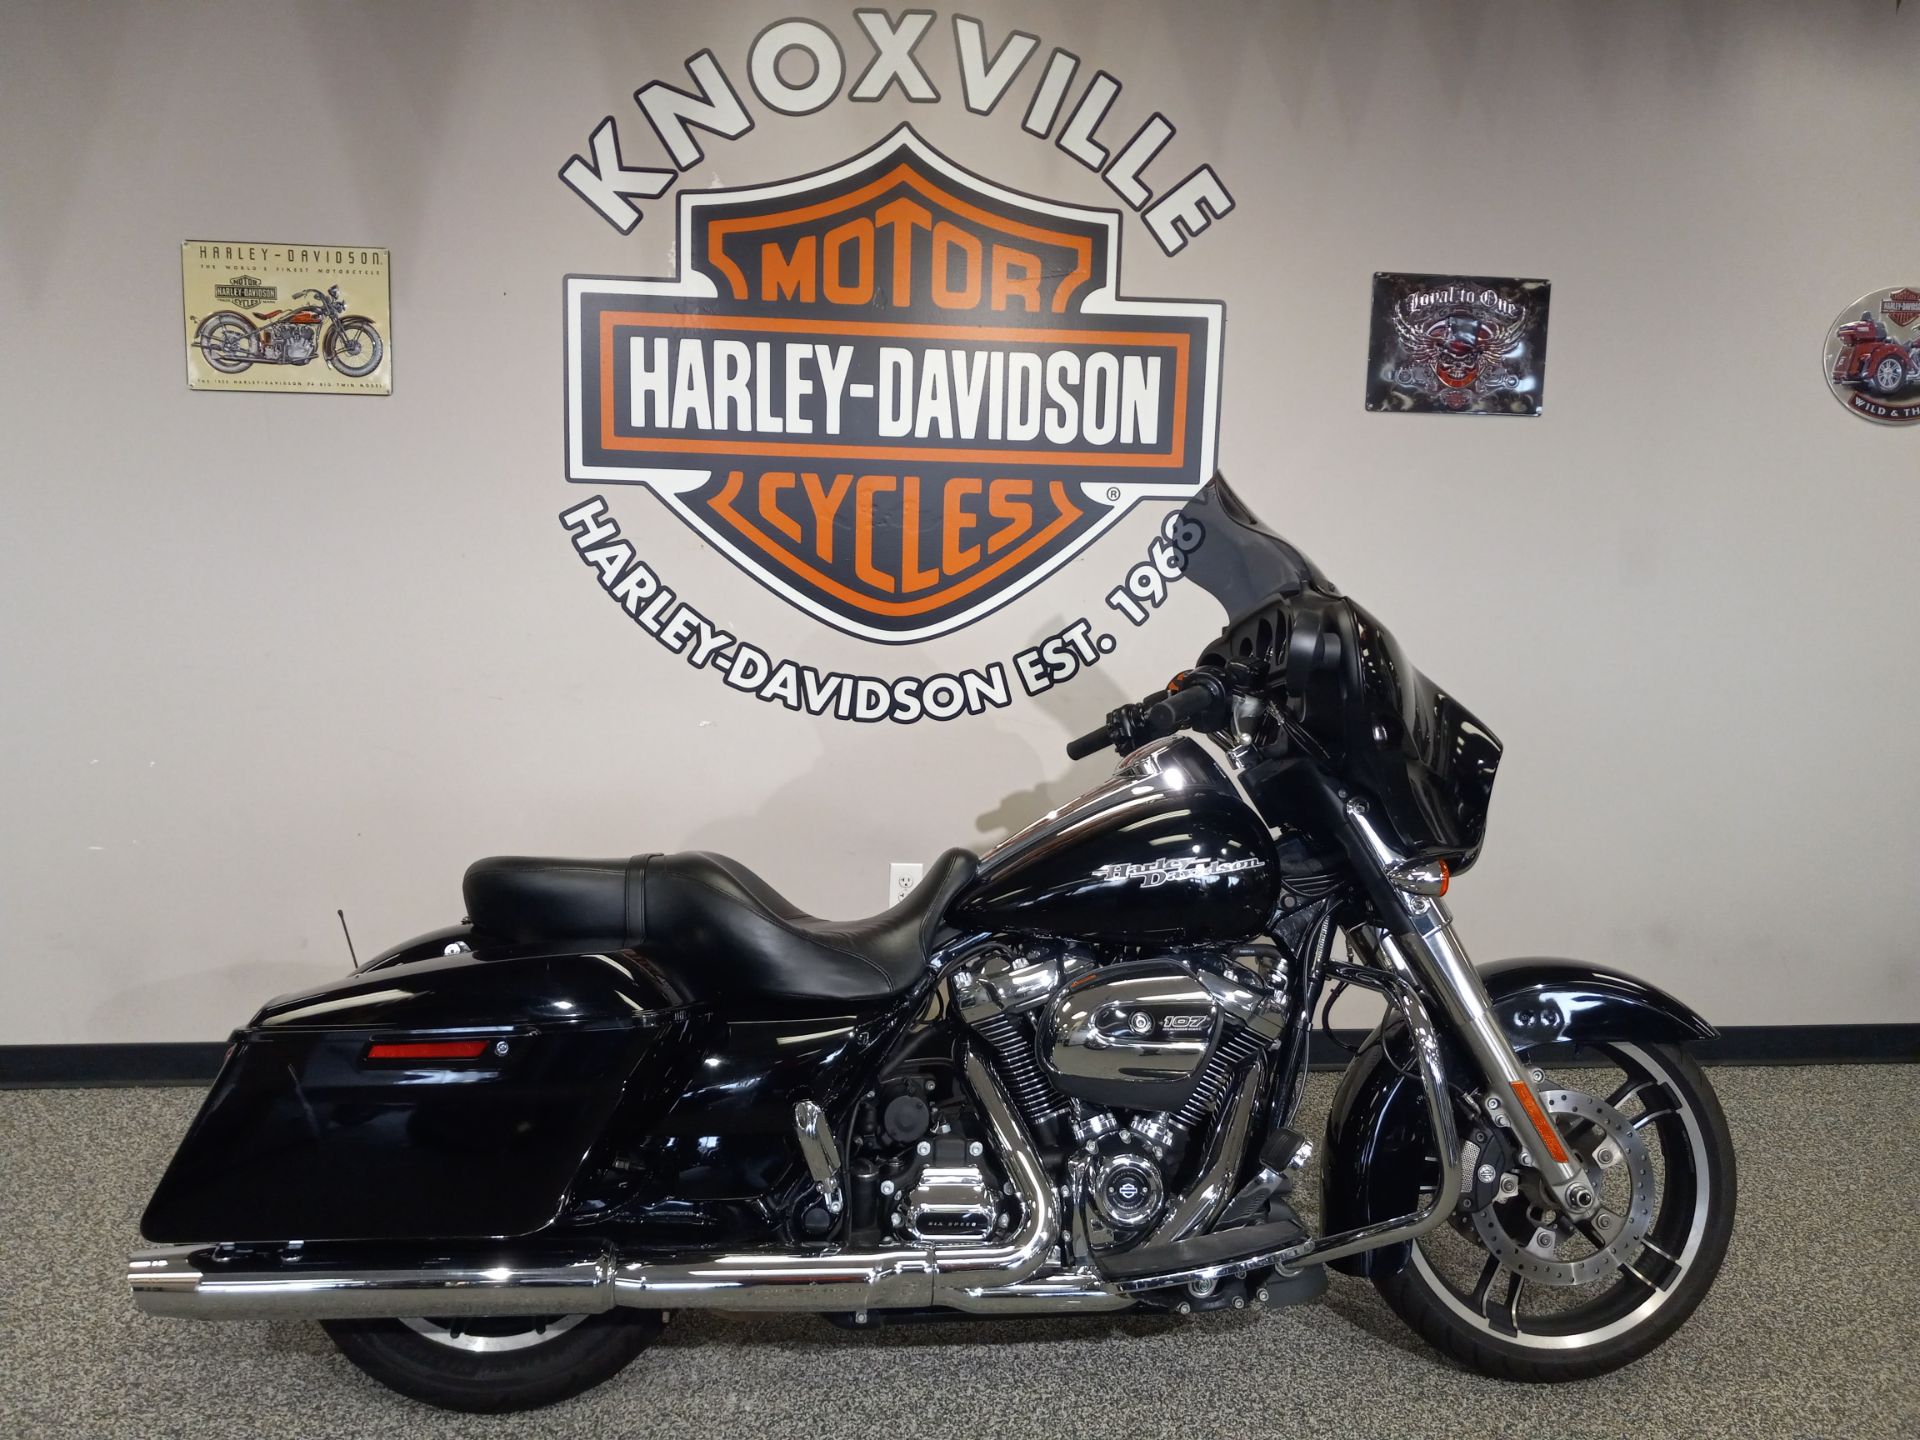 2019 Harley-Davidson Street Glide® in Knoxville, Tennessee - Photo 1